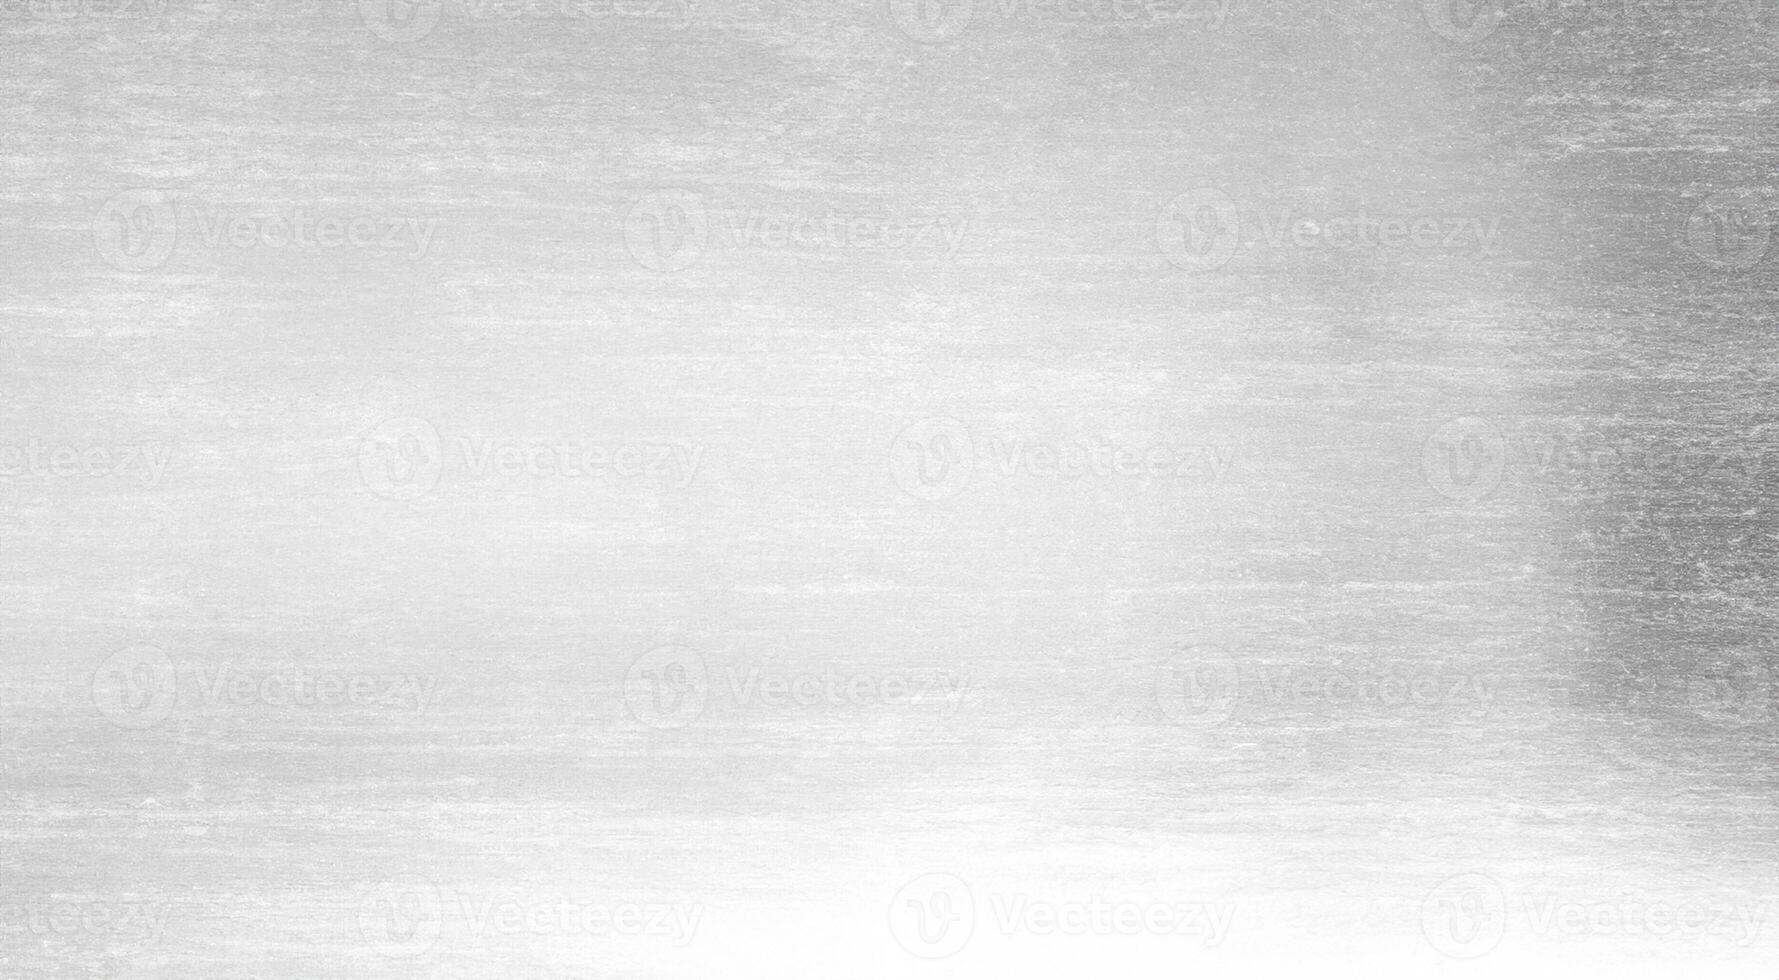 Silver foil shiny metal texture background photo